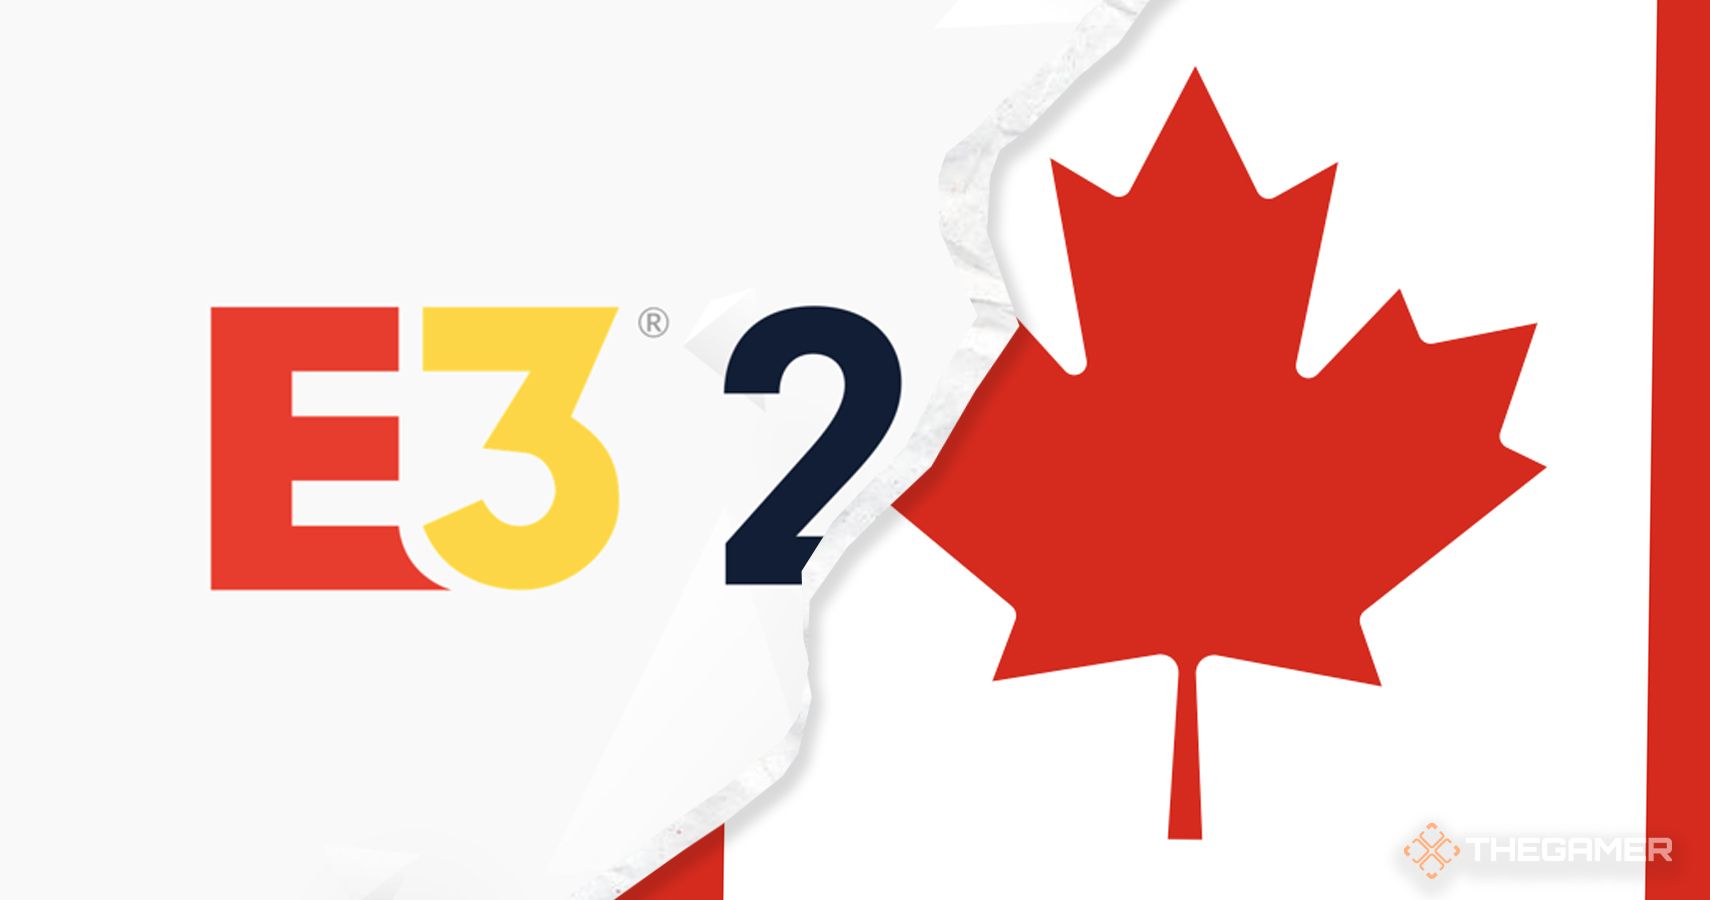 The E3 logo, torn to show the Canadian flag behind it